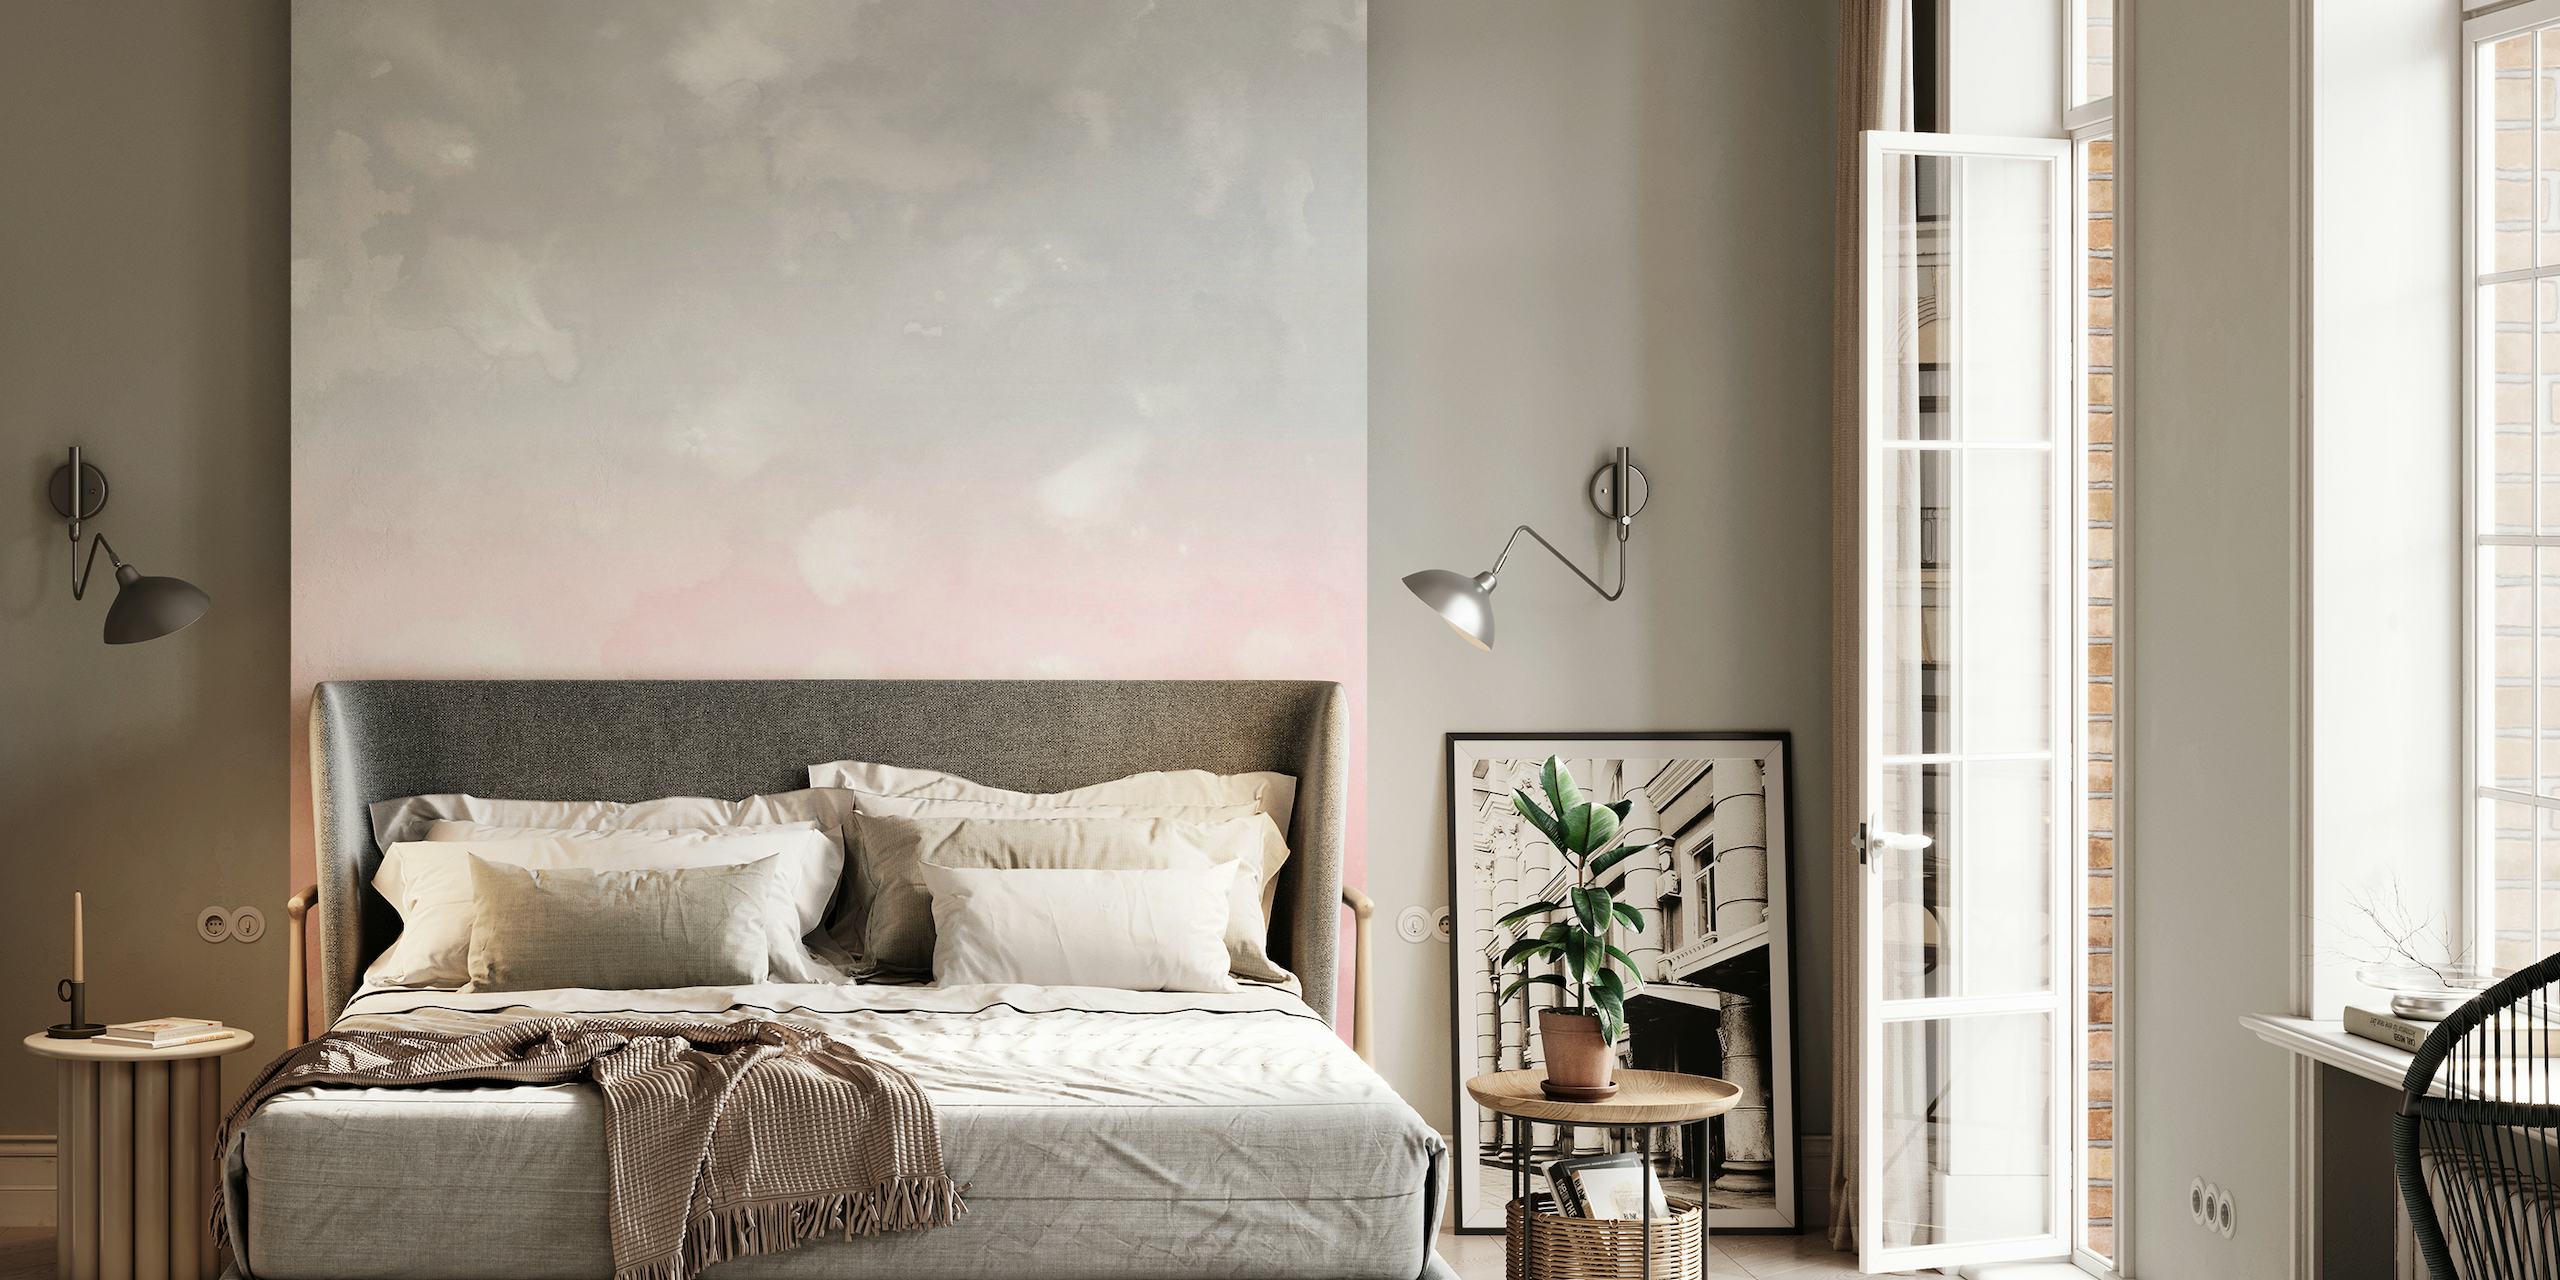 Blush and gray abstract wall mural with a soft, dreamy watercolor texture